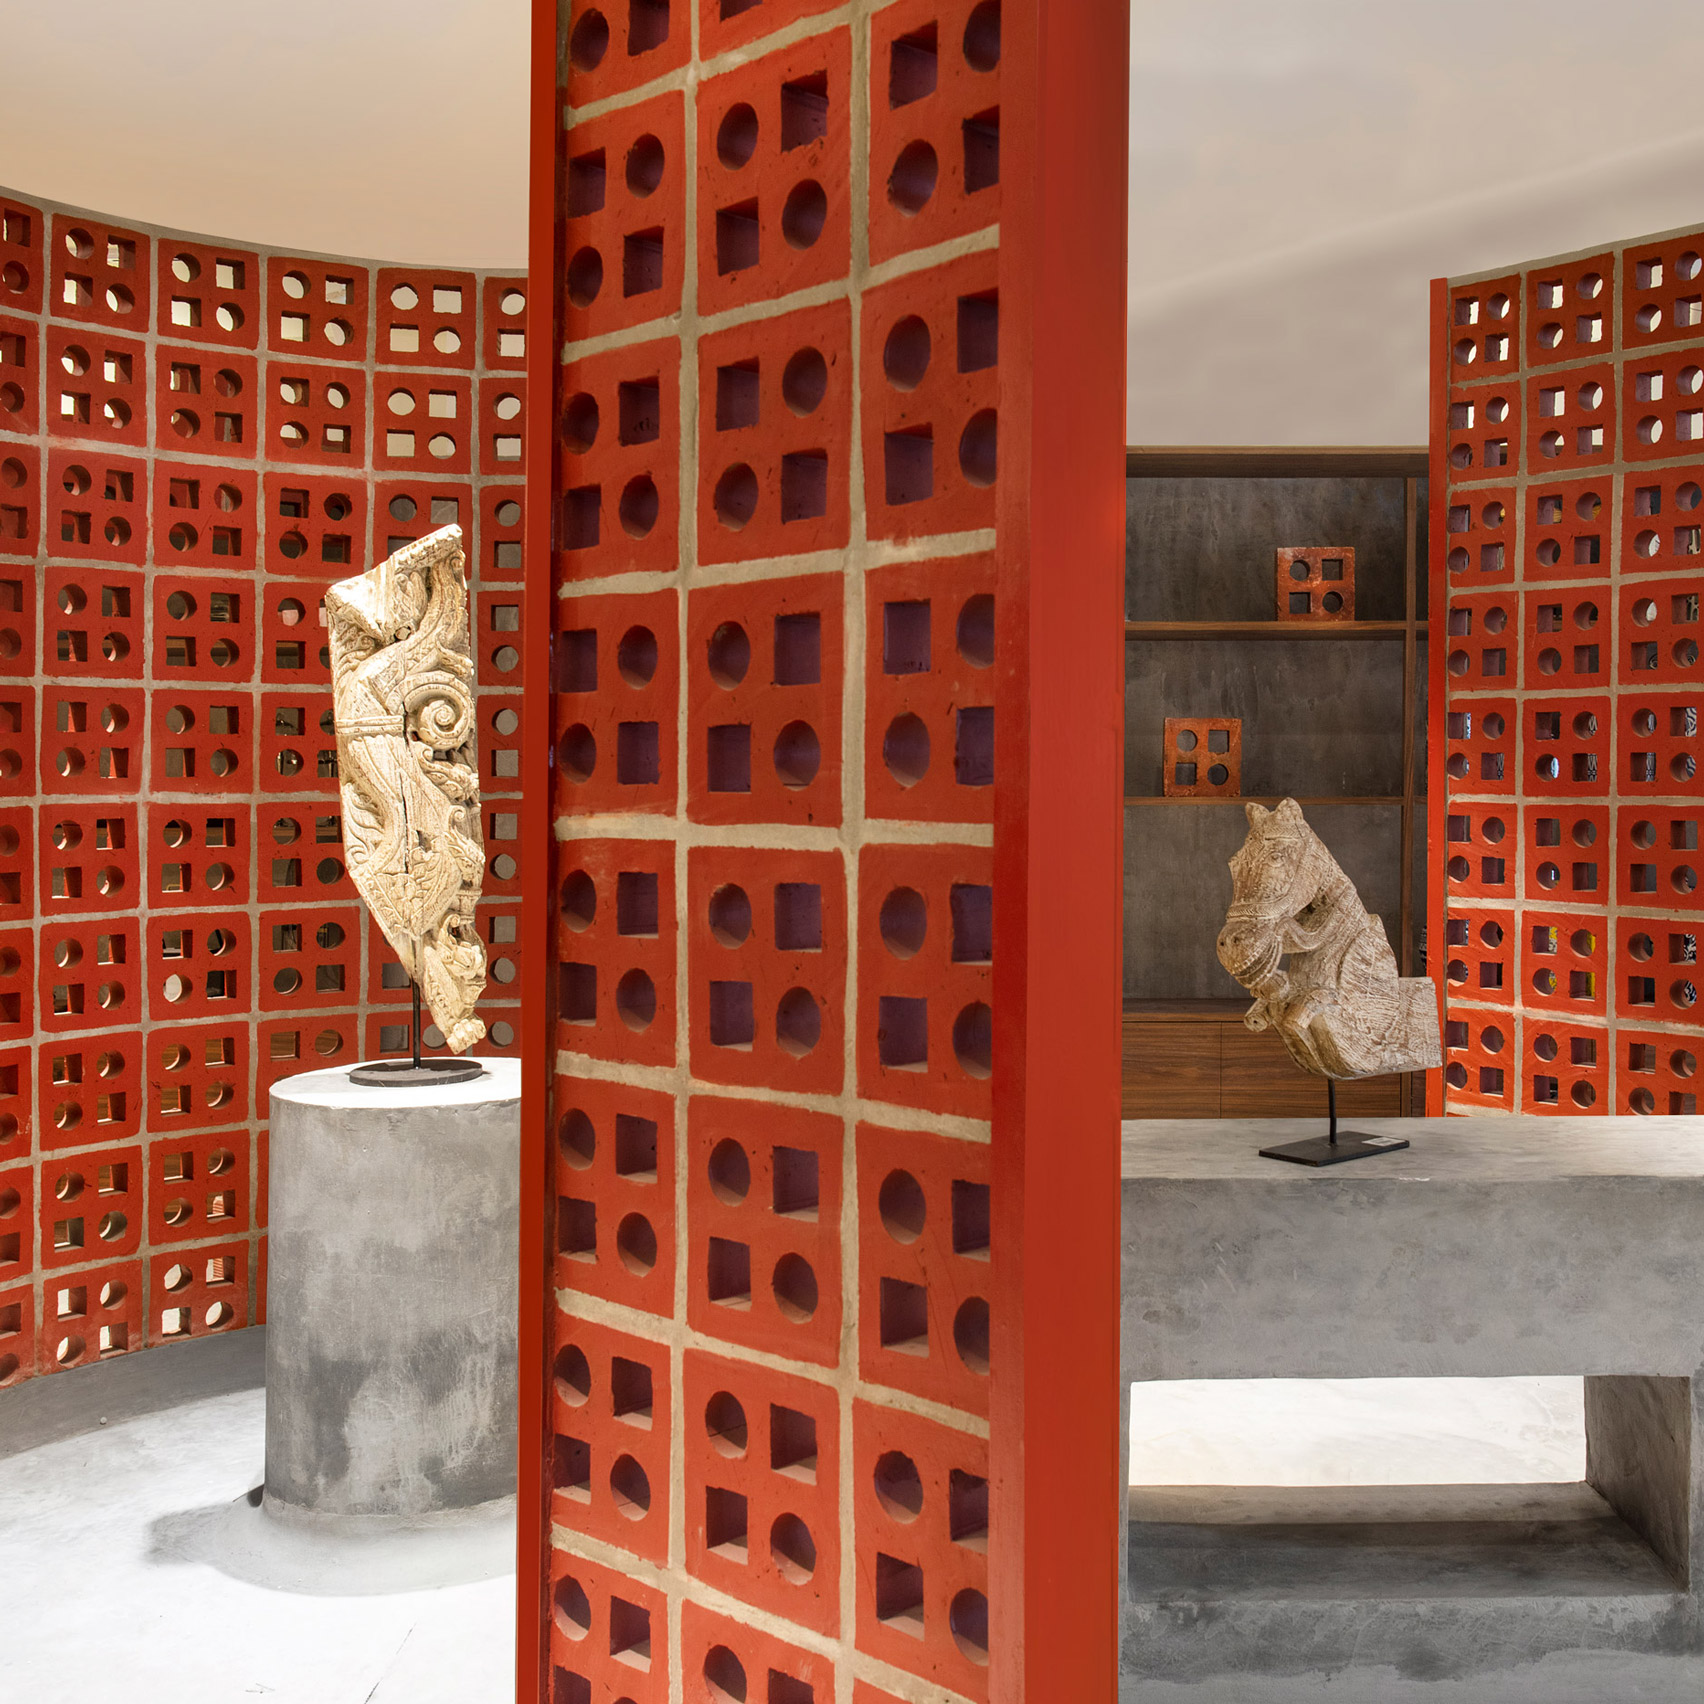 Indian architecture of 2020: Terracotta brick screens in Indian store